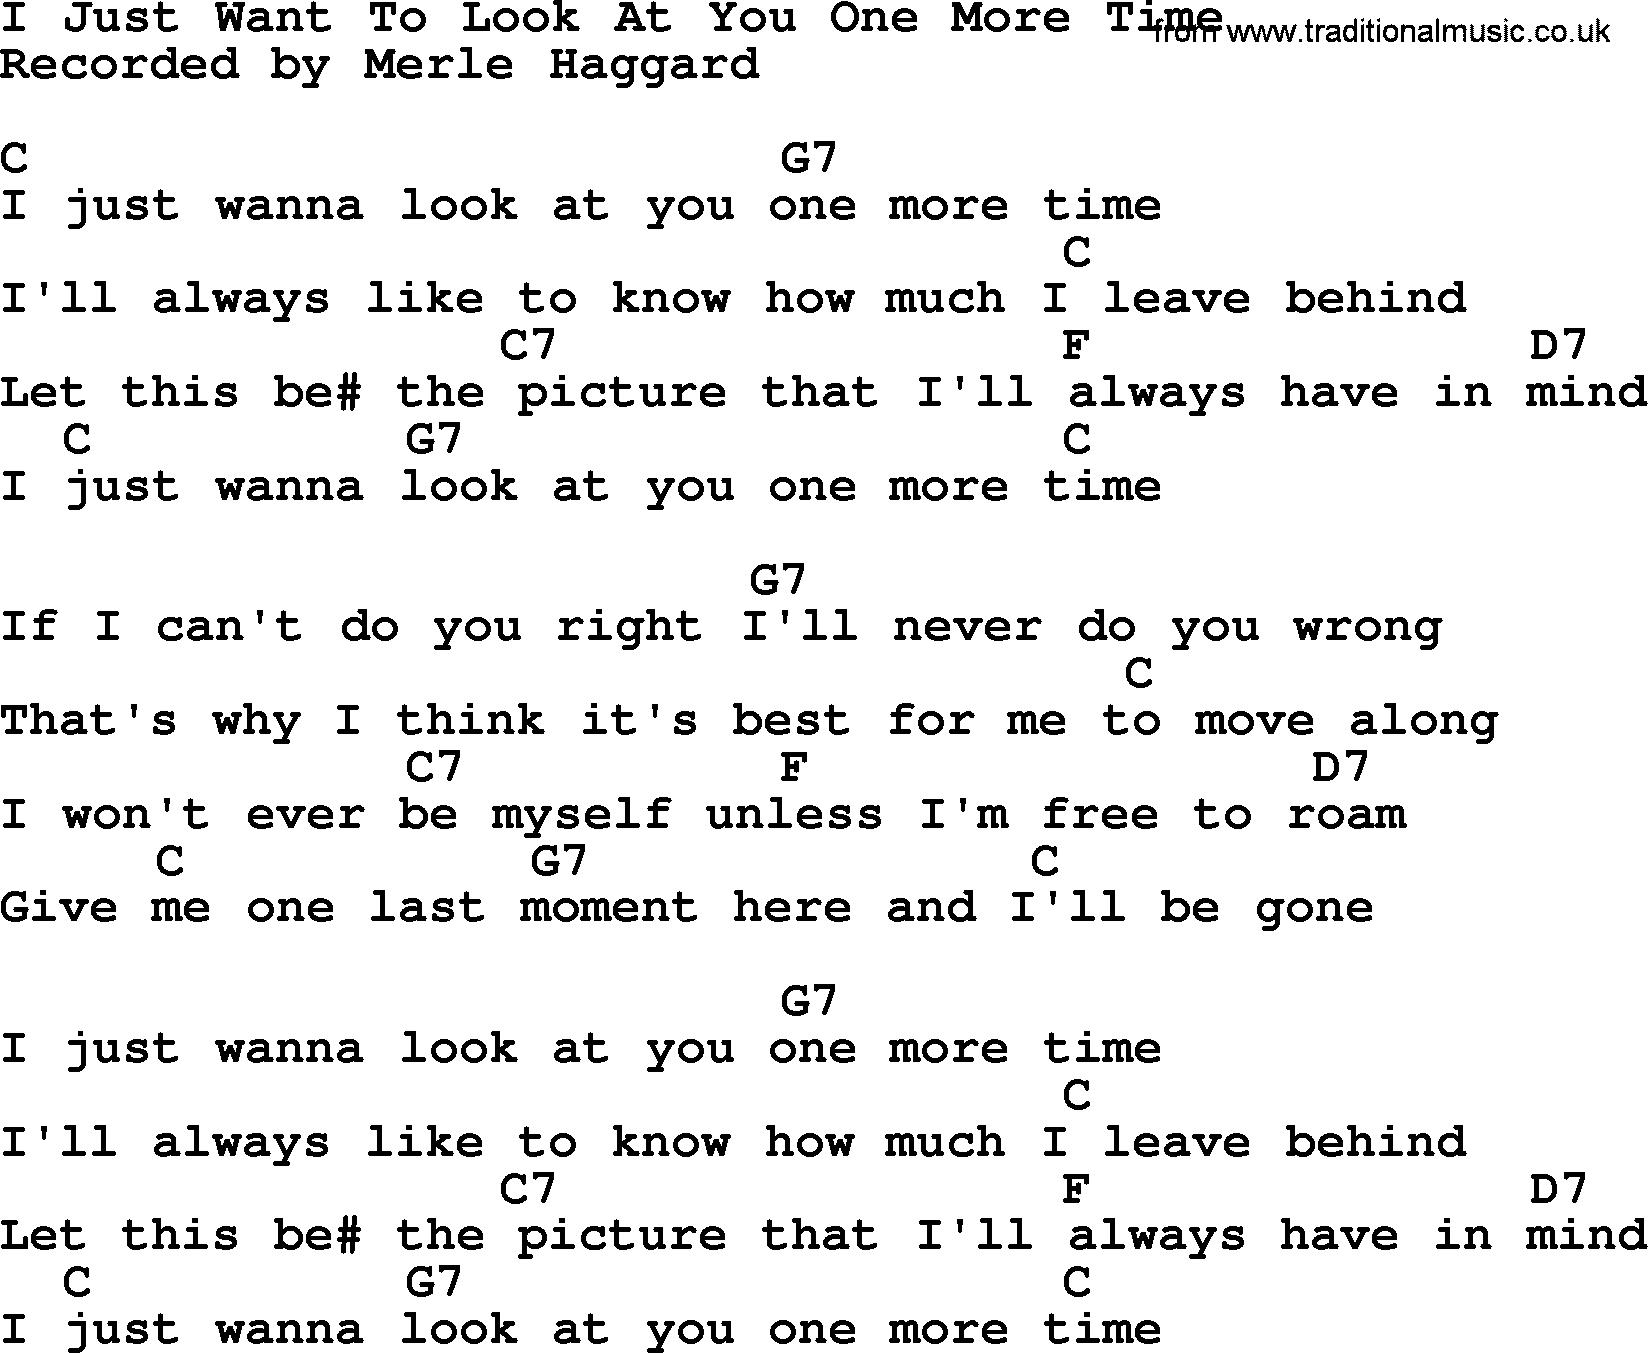 Merle Haggard song: I Just Want To Look At You One More Time, lyrics and chords